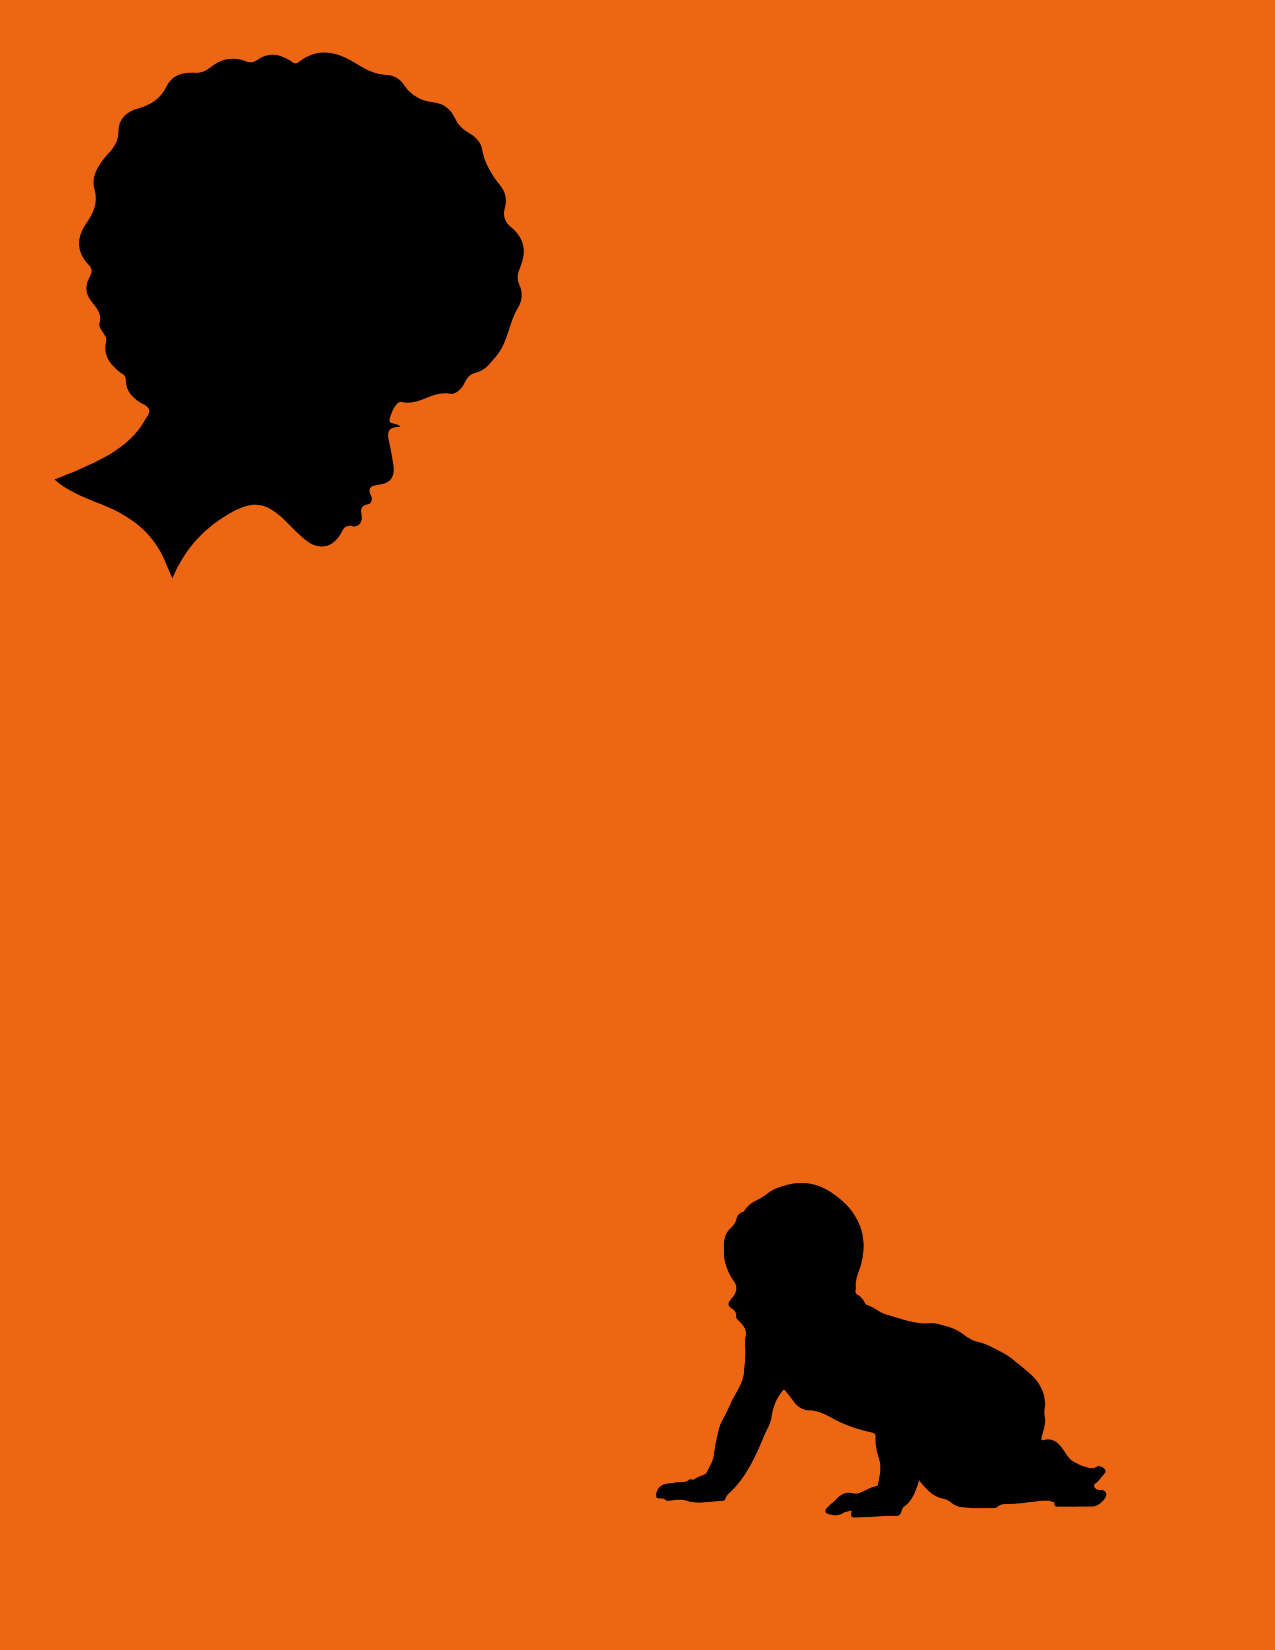 Solid orange background, afro woman silhouette in top left corner looking down on silhouette crawling baby on bottom right corner 